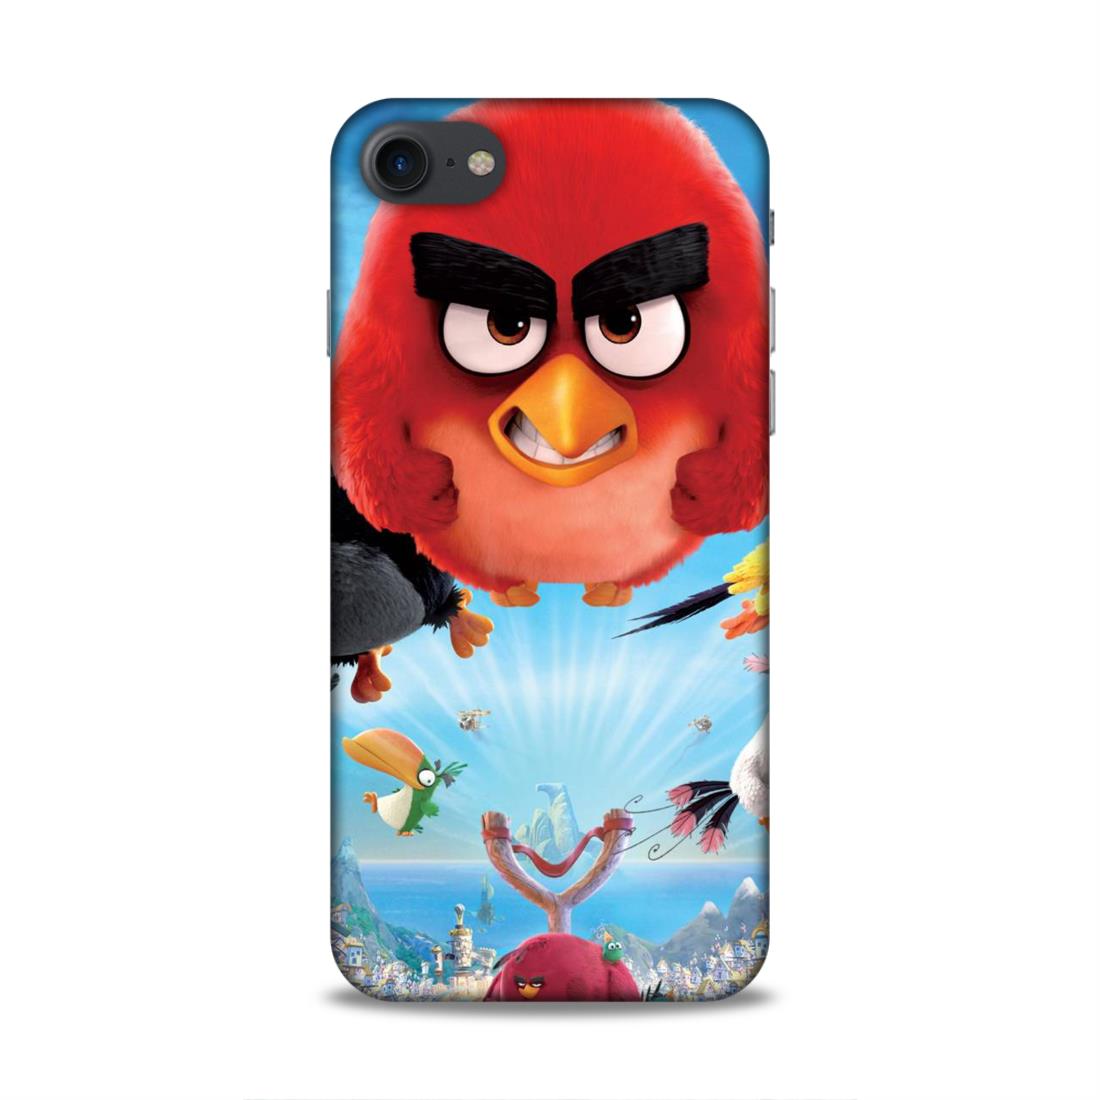 Flying Angry Bird Hard Back Case For Apple iPhone 7 / 8 / SE 2020